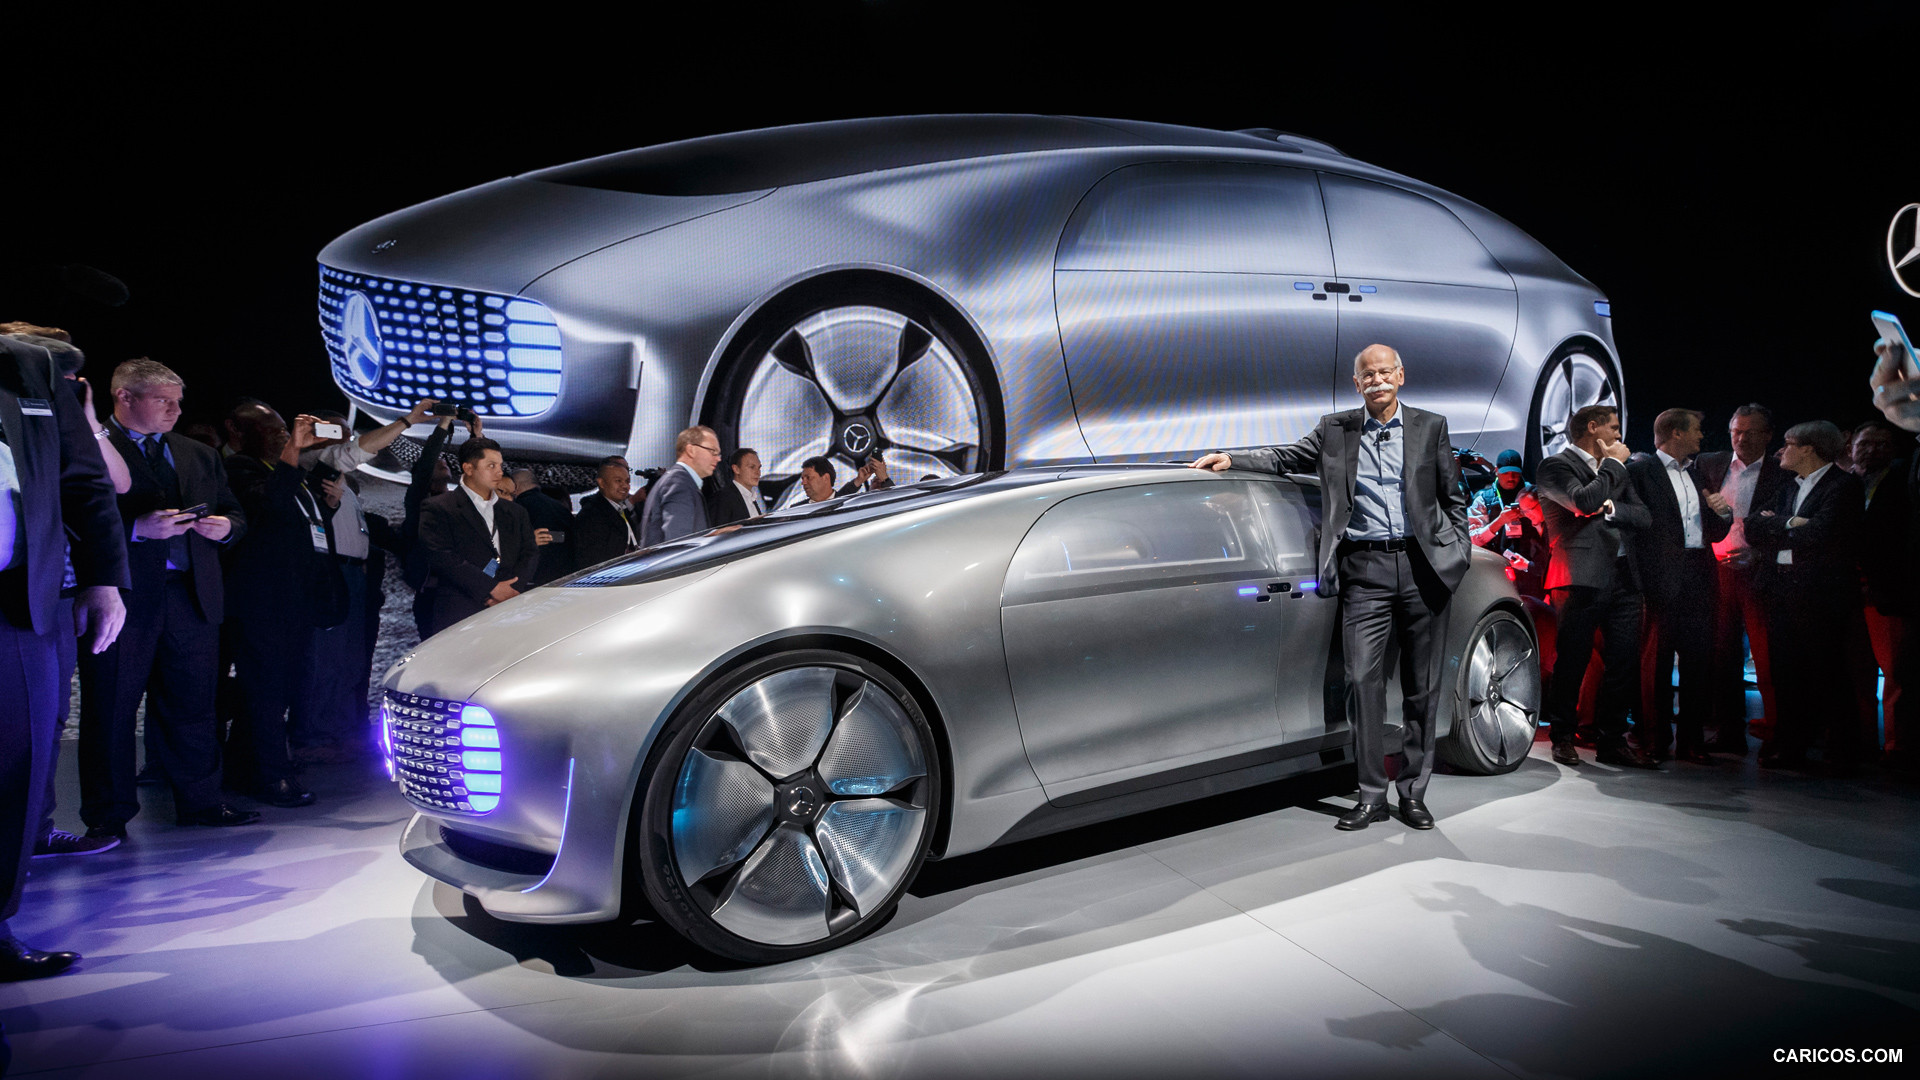 2015 Mercedes-Benz F 015 Luxury in Motion Concept at CES - Side, #90 of 92